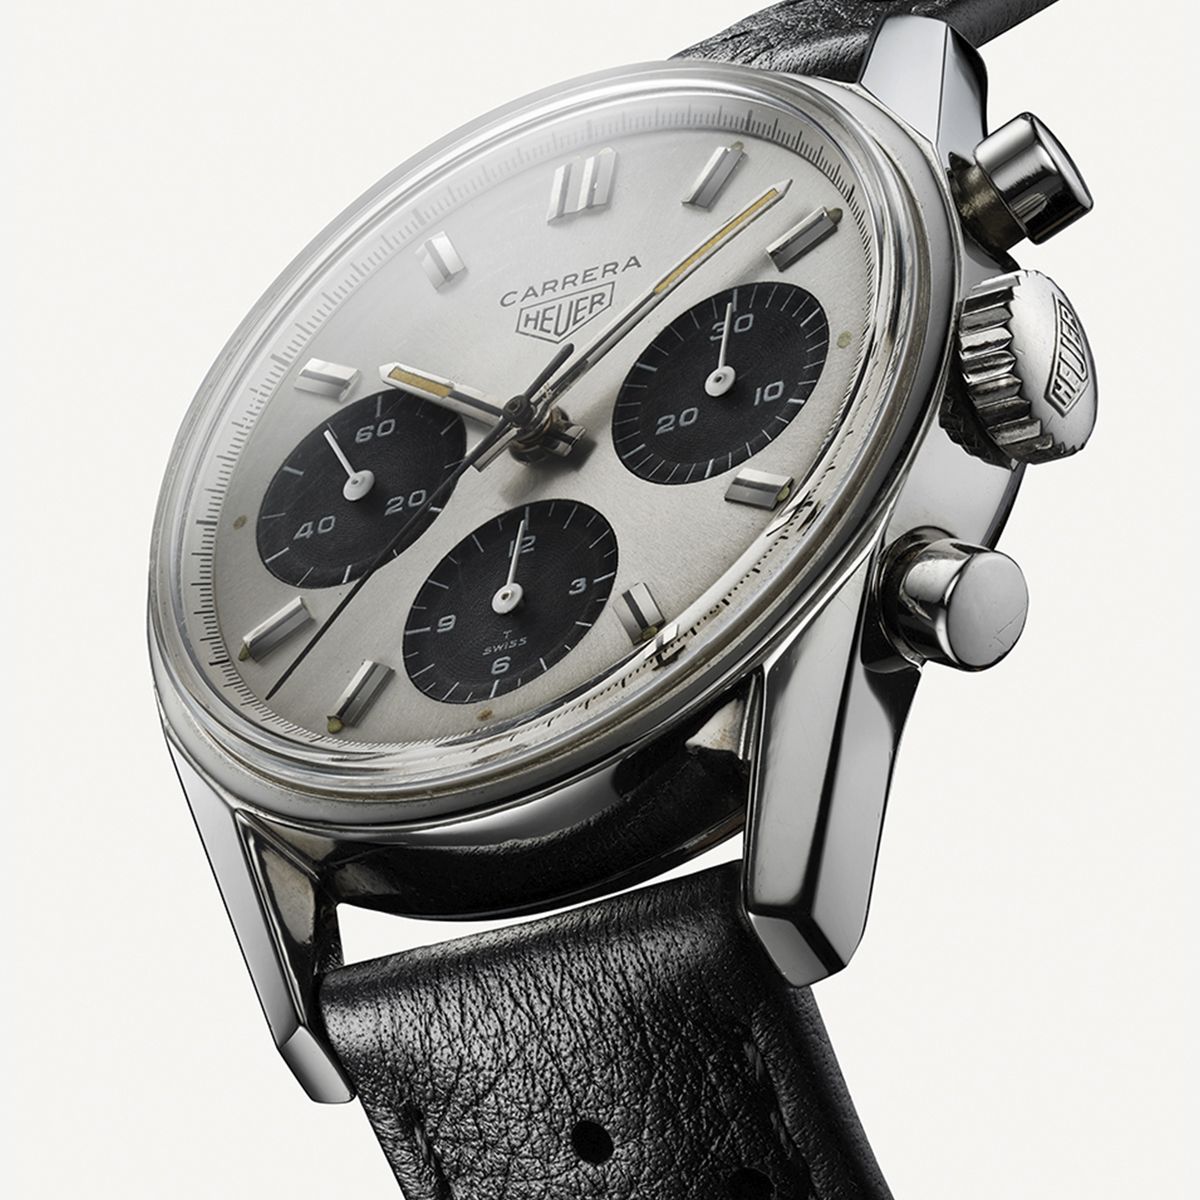 Tag Heuer Reissues Grail Edition of its Carrera Watch